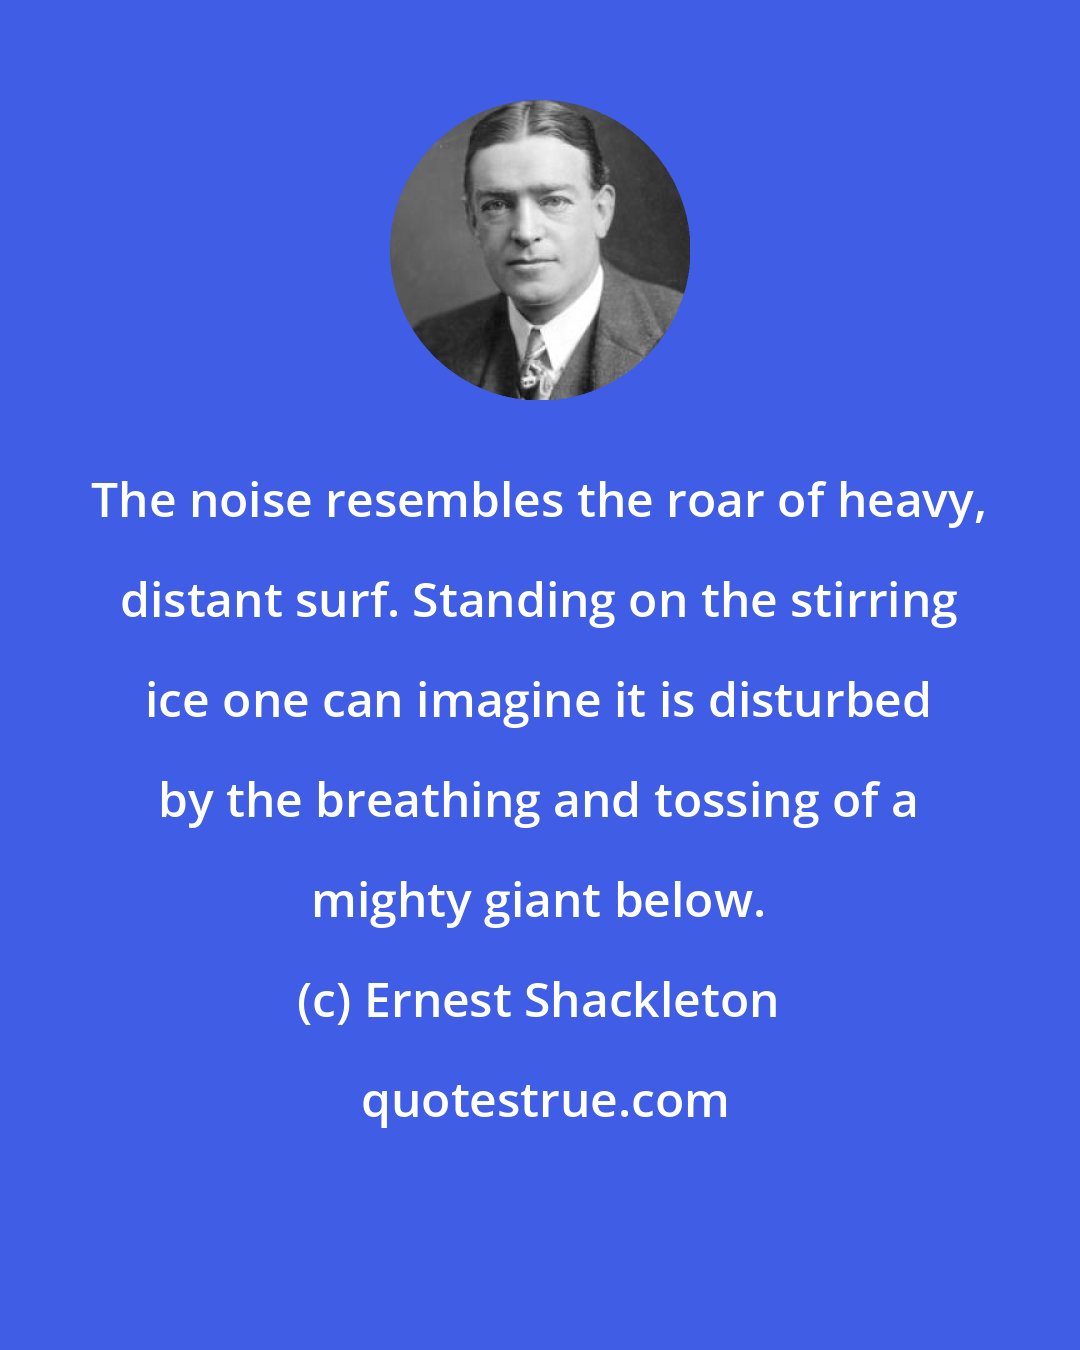 Ernest Shackleton: The noise resembles the roar of heavy, distant surf. Standing on the stirring ice one can imagine it is disturbed by the breathing and tossing of a mighty giant below.